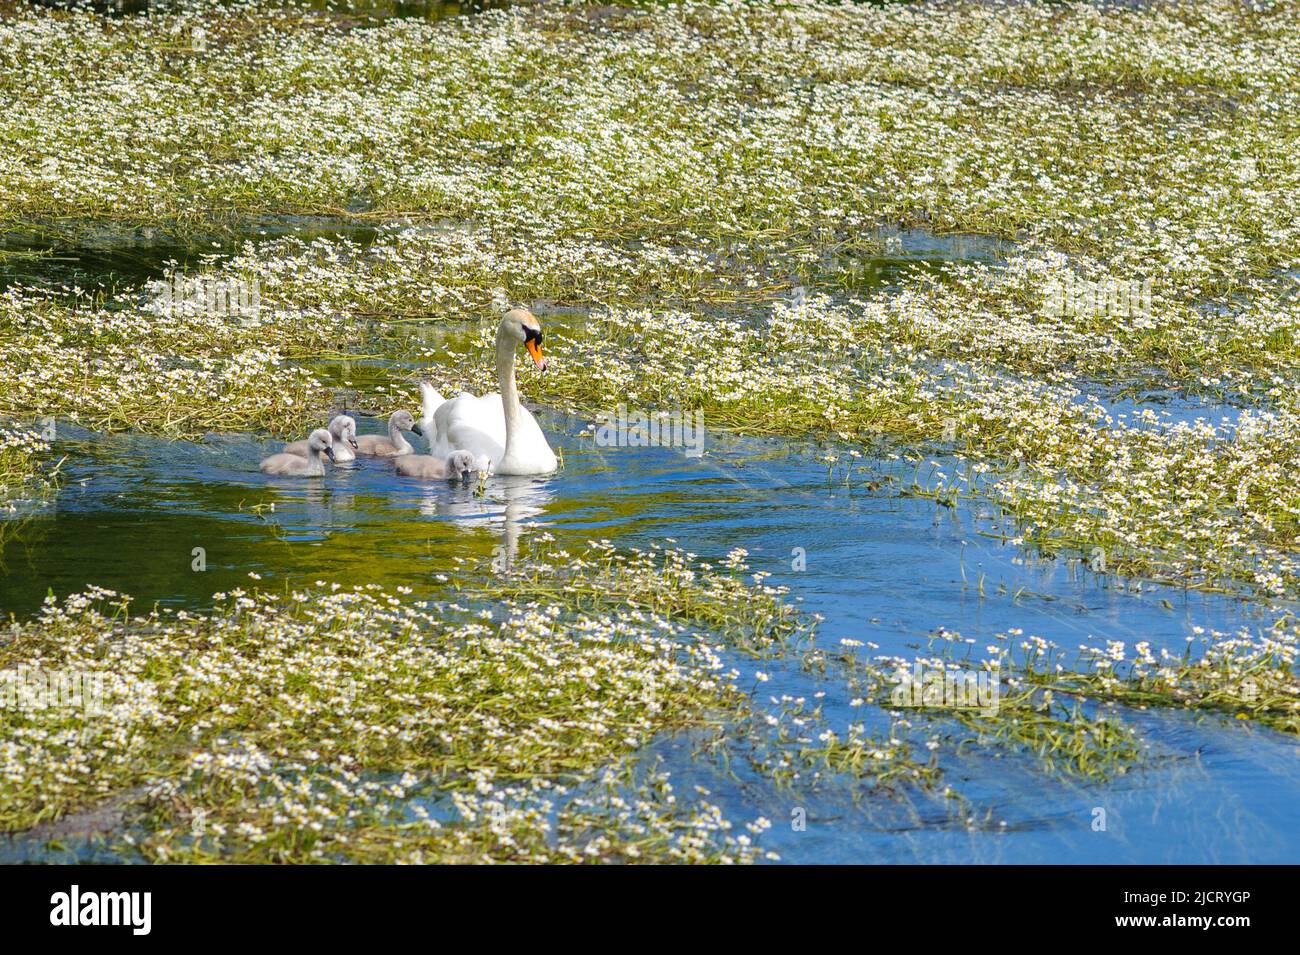 Avon Valley, Fordingbridge, Hampshire, UK, 15th June 2022, Weather. A swan with four signets swims among the reeds in the cool, clear water of the River Avon on a hot summer day. Paul Biggins/Alamy Live News Stock Photo